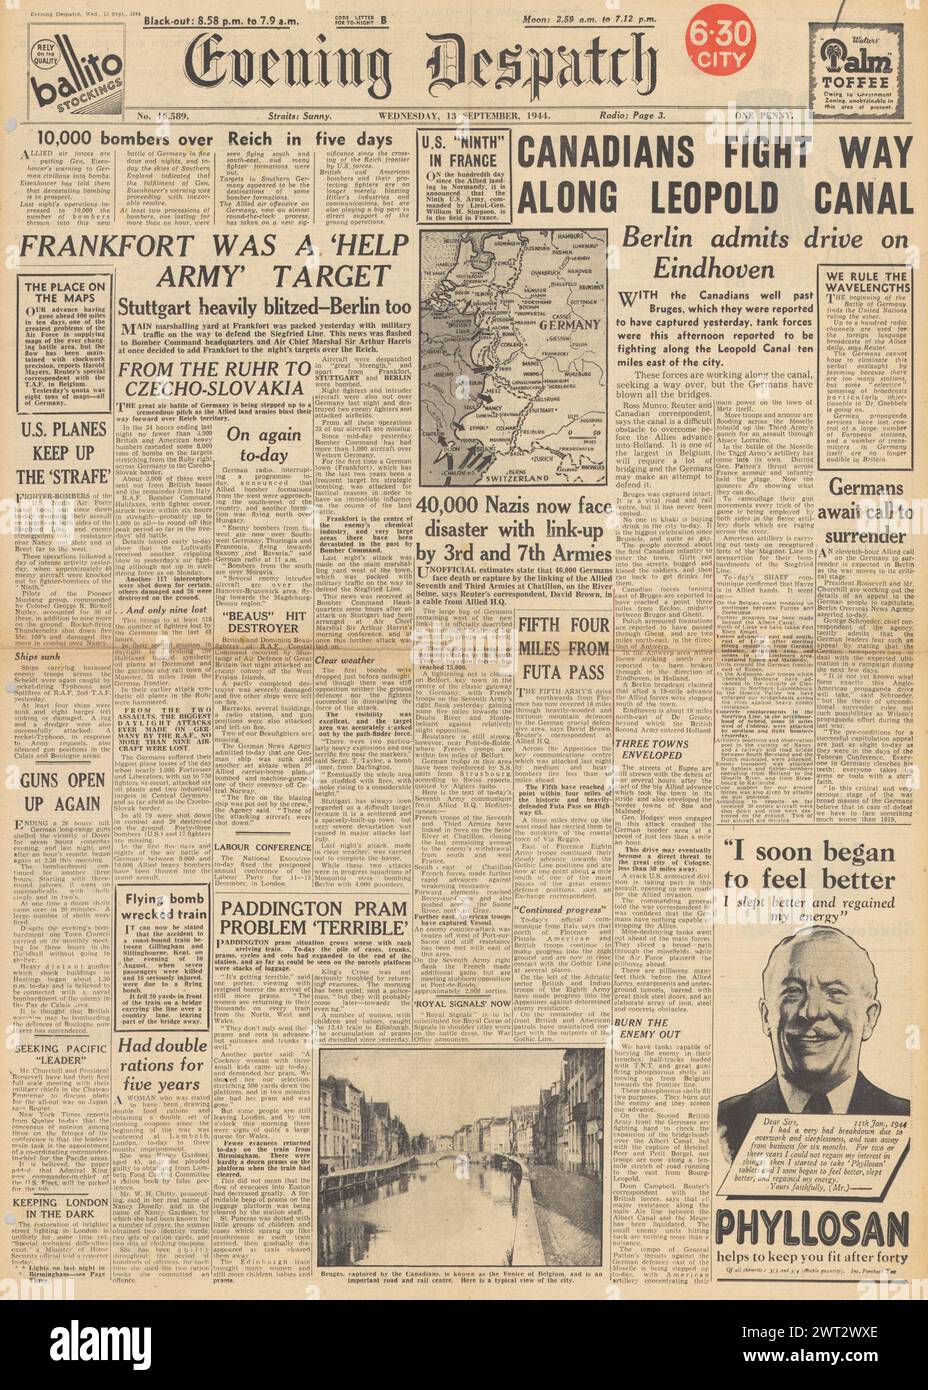 1944 Evening Despatch front page reporting RAF bomb Frankfurt and Berlin and Canadian forces on Leopold Canal Stock Photo